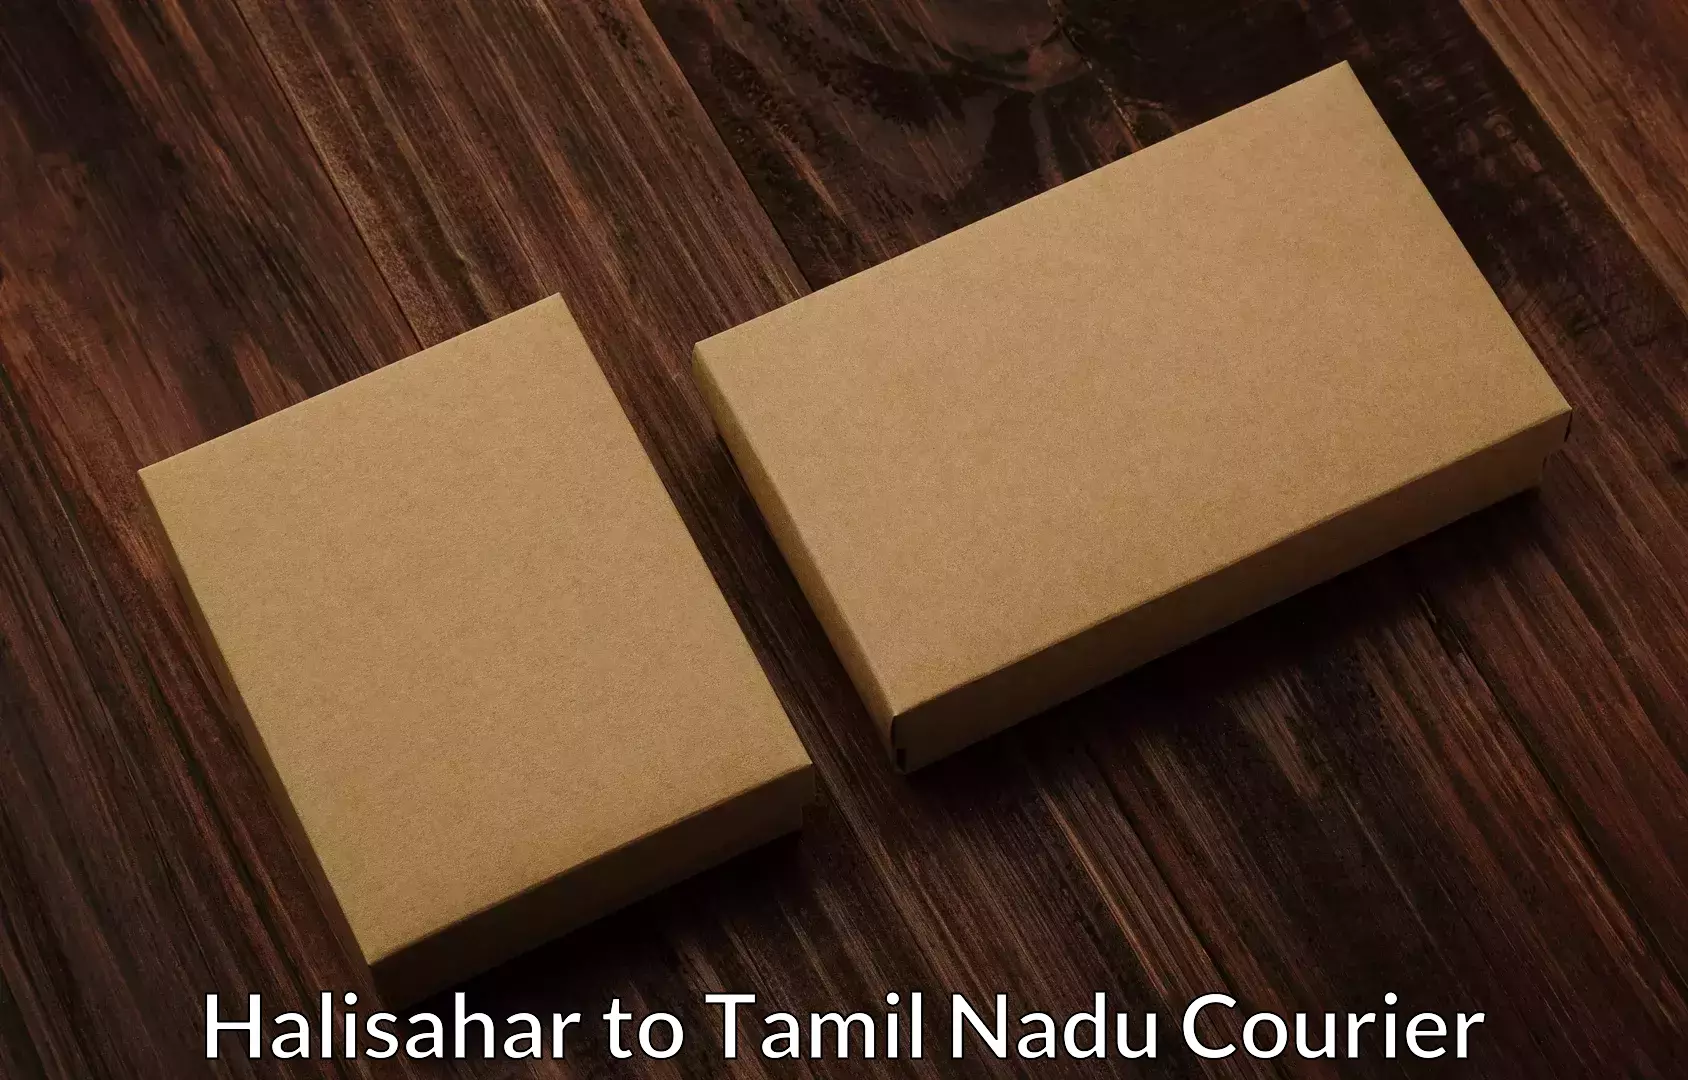 Trusted relocation experts Halisahar to Tamil Nadu